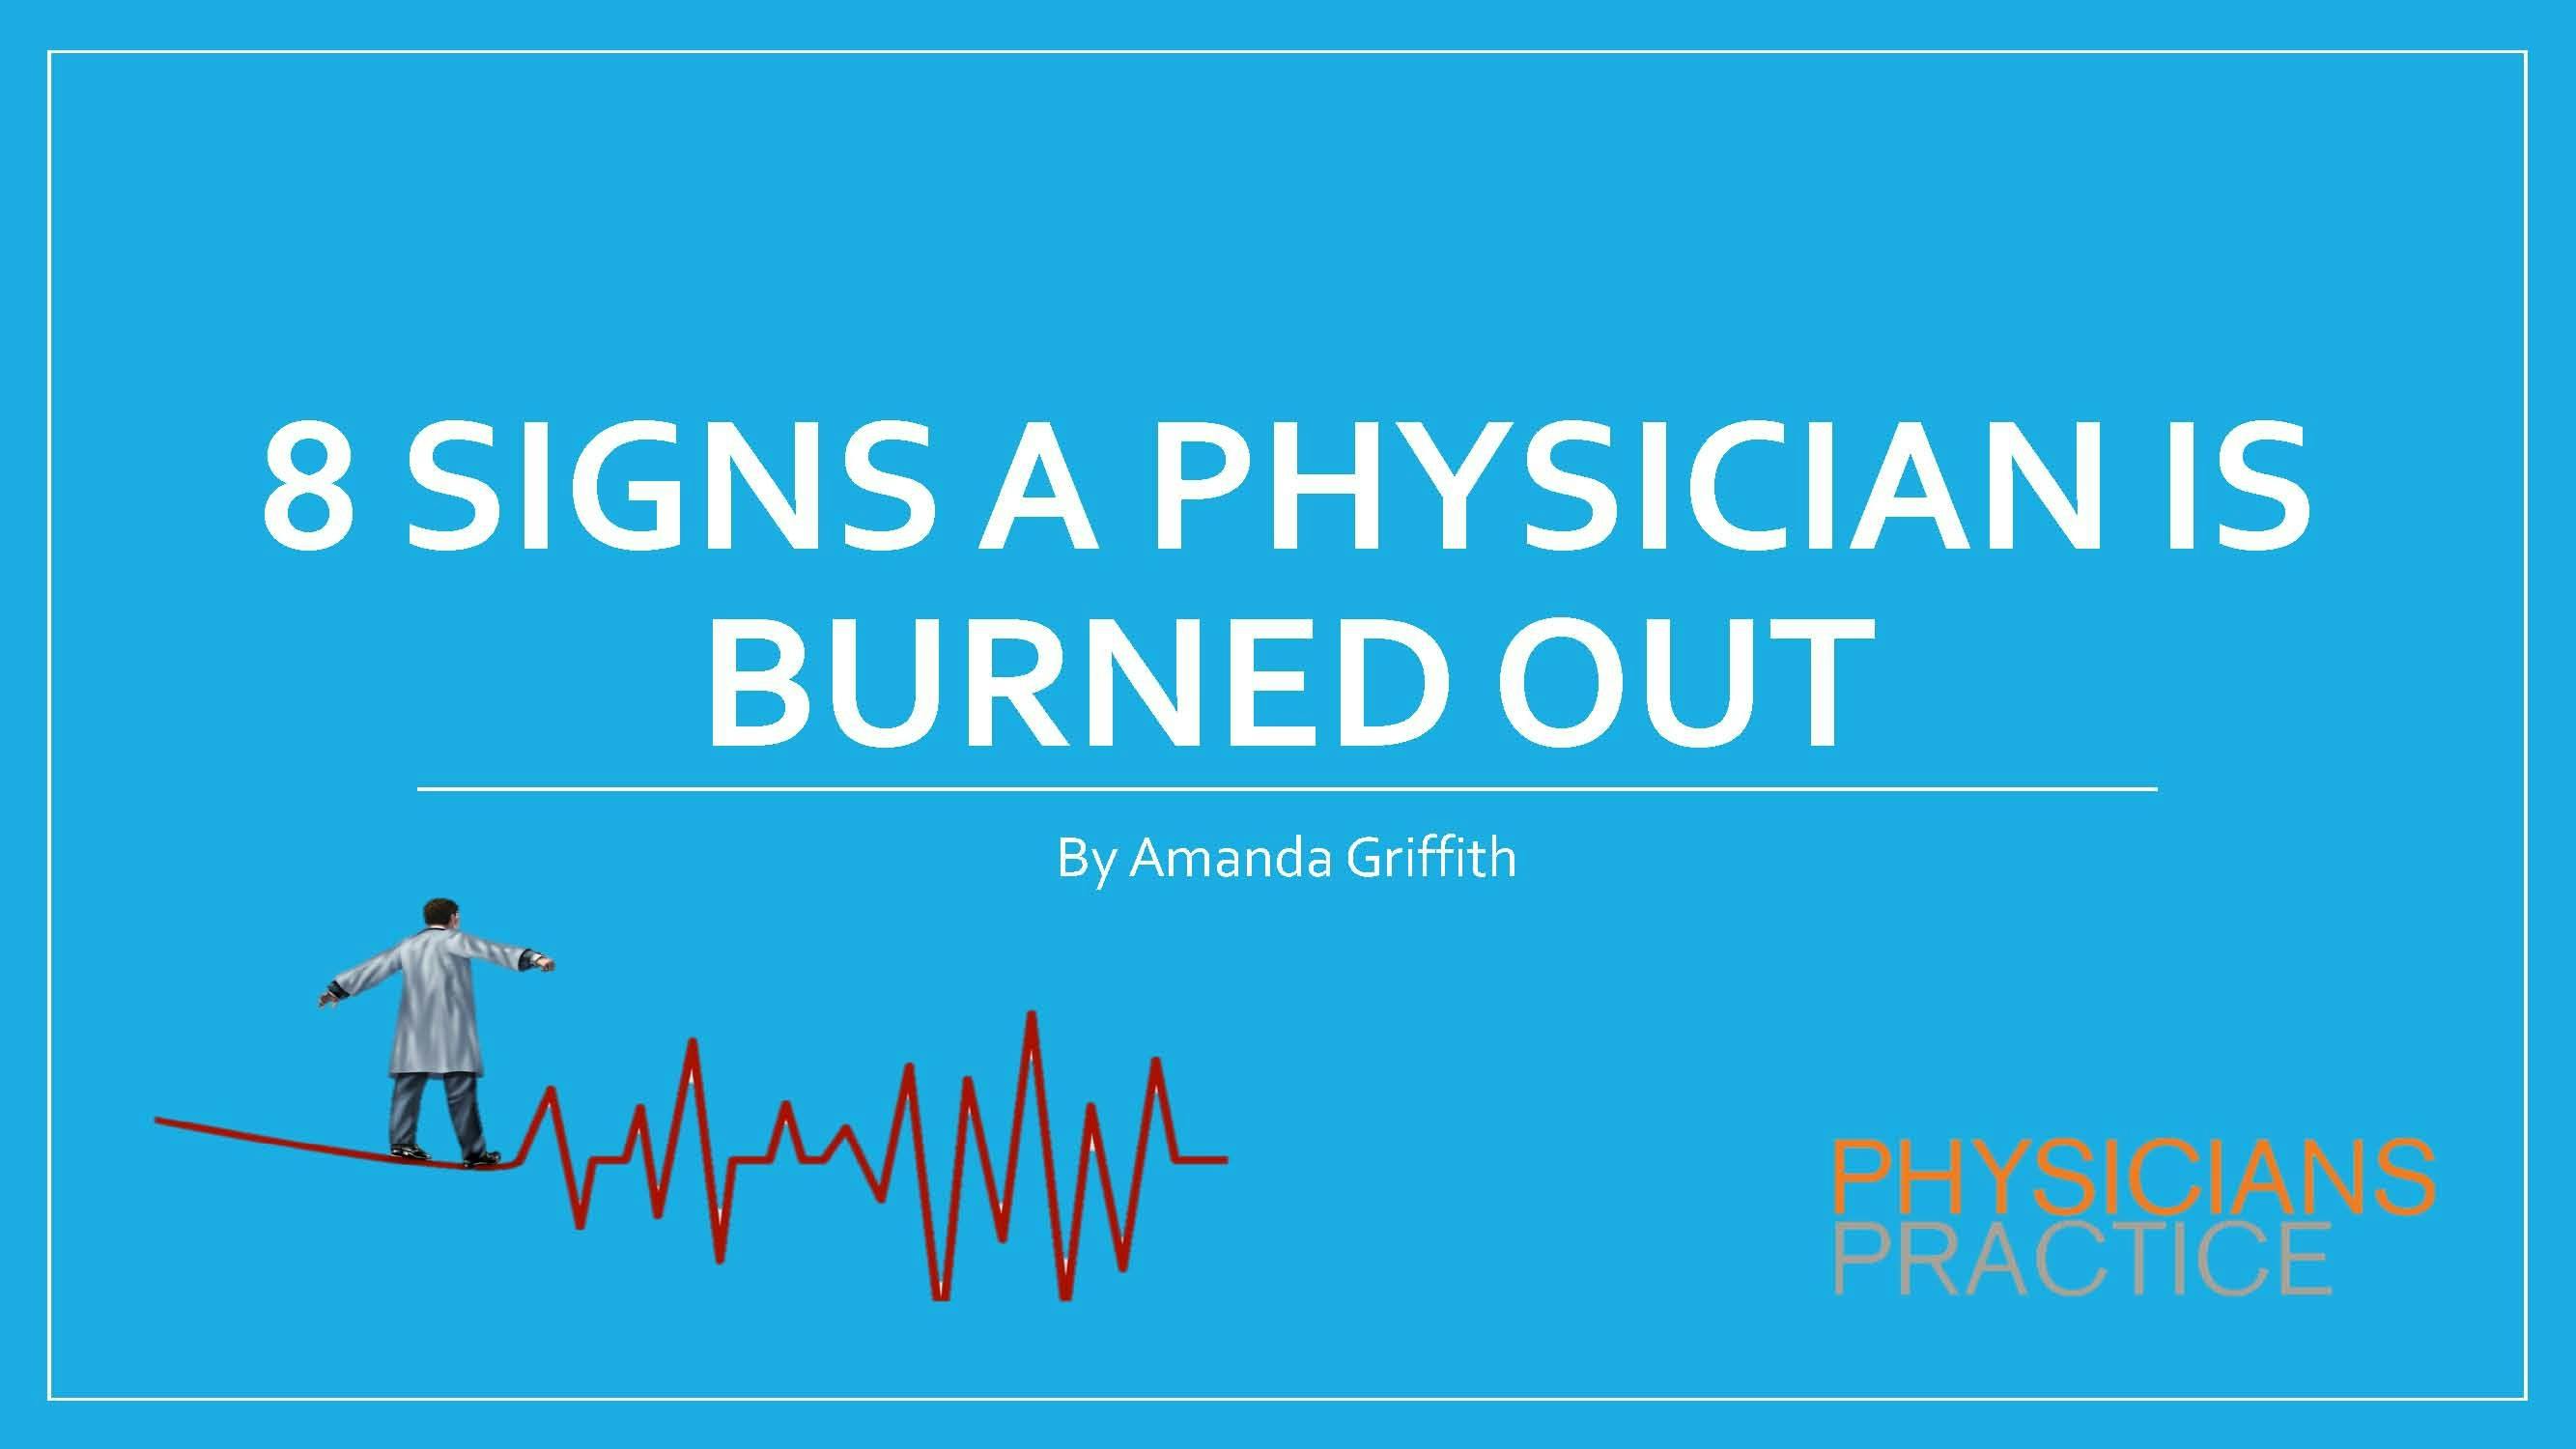 8 Signs a Physician is Burned Out